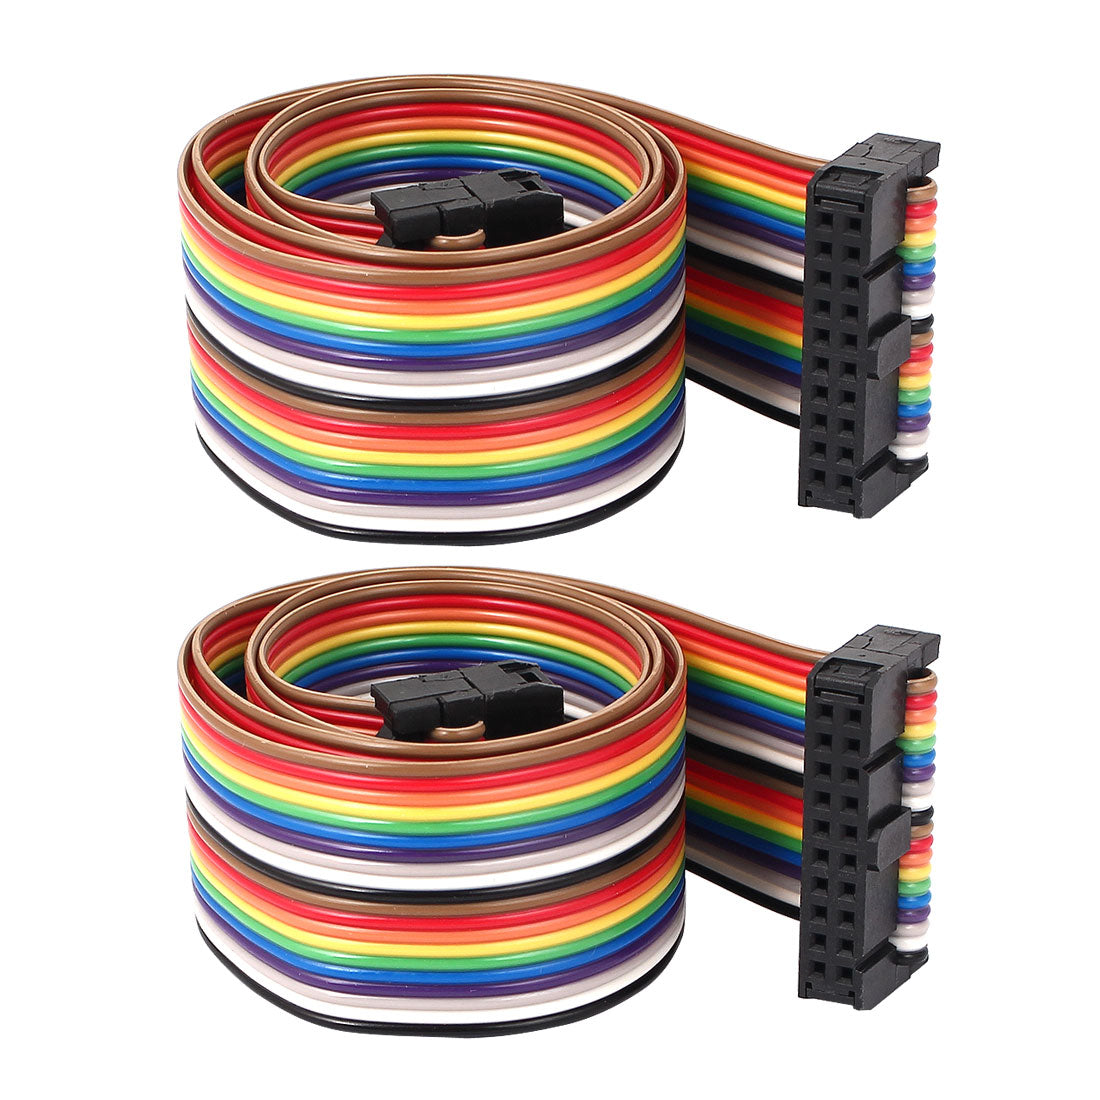 Uxcell Uxcell 50cm 20 Pin 20 Way F/F Connector IDC Flat Rainbow Color Ribbon Cable for Arduino DIY 2pcs